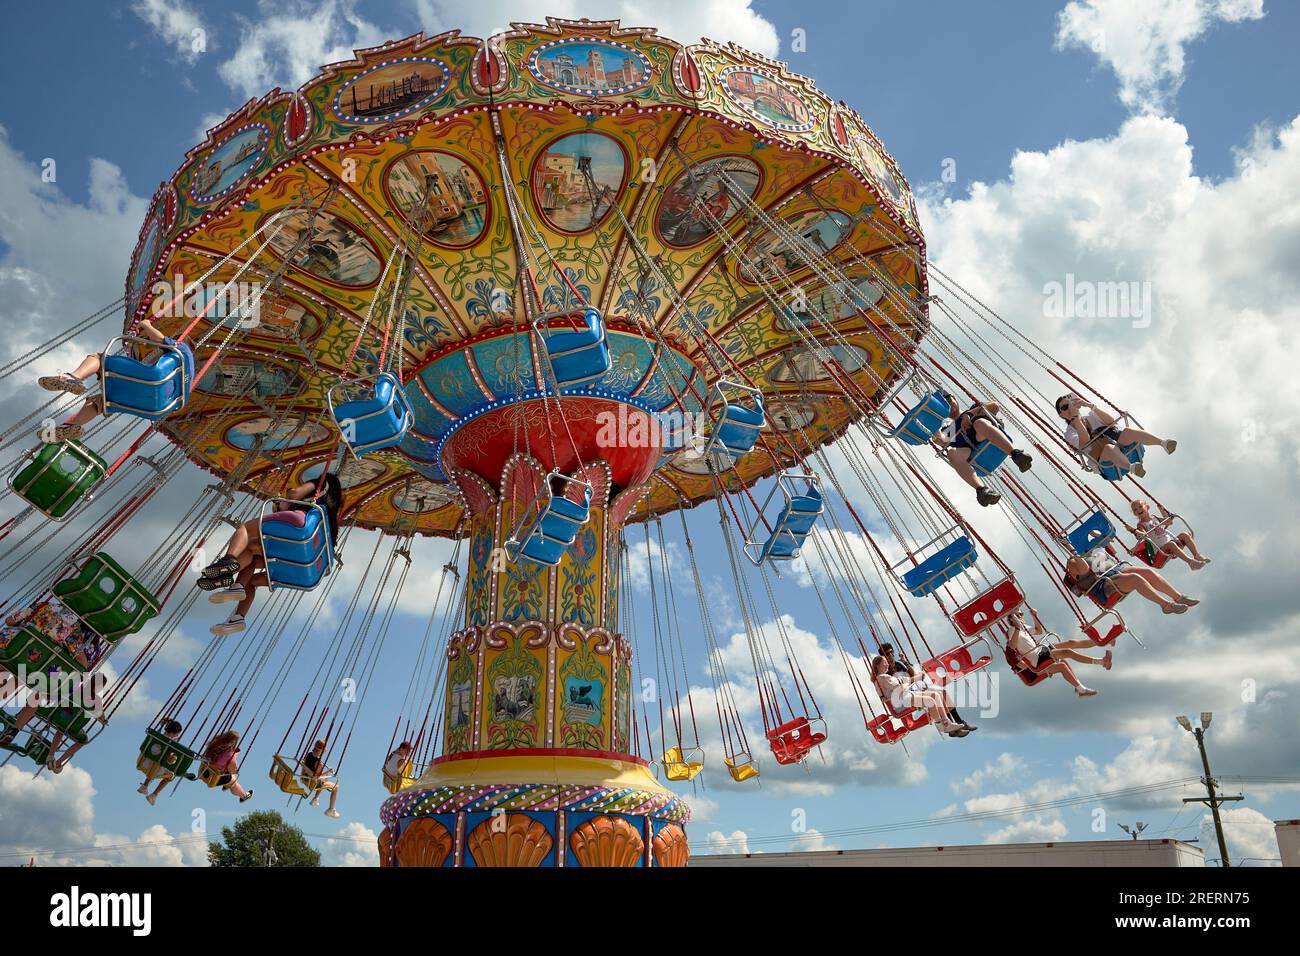 Fair goers enjoy a tilting swing ride on the midway at the 2023 Delaware State Fair, Harrington, Delaware USA. Stock Photo